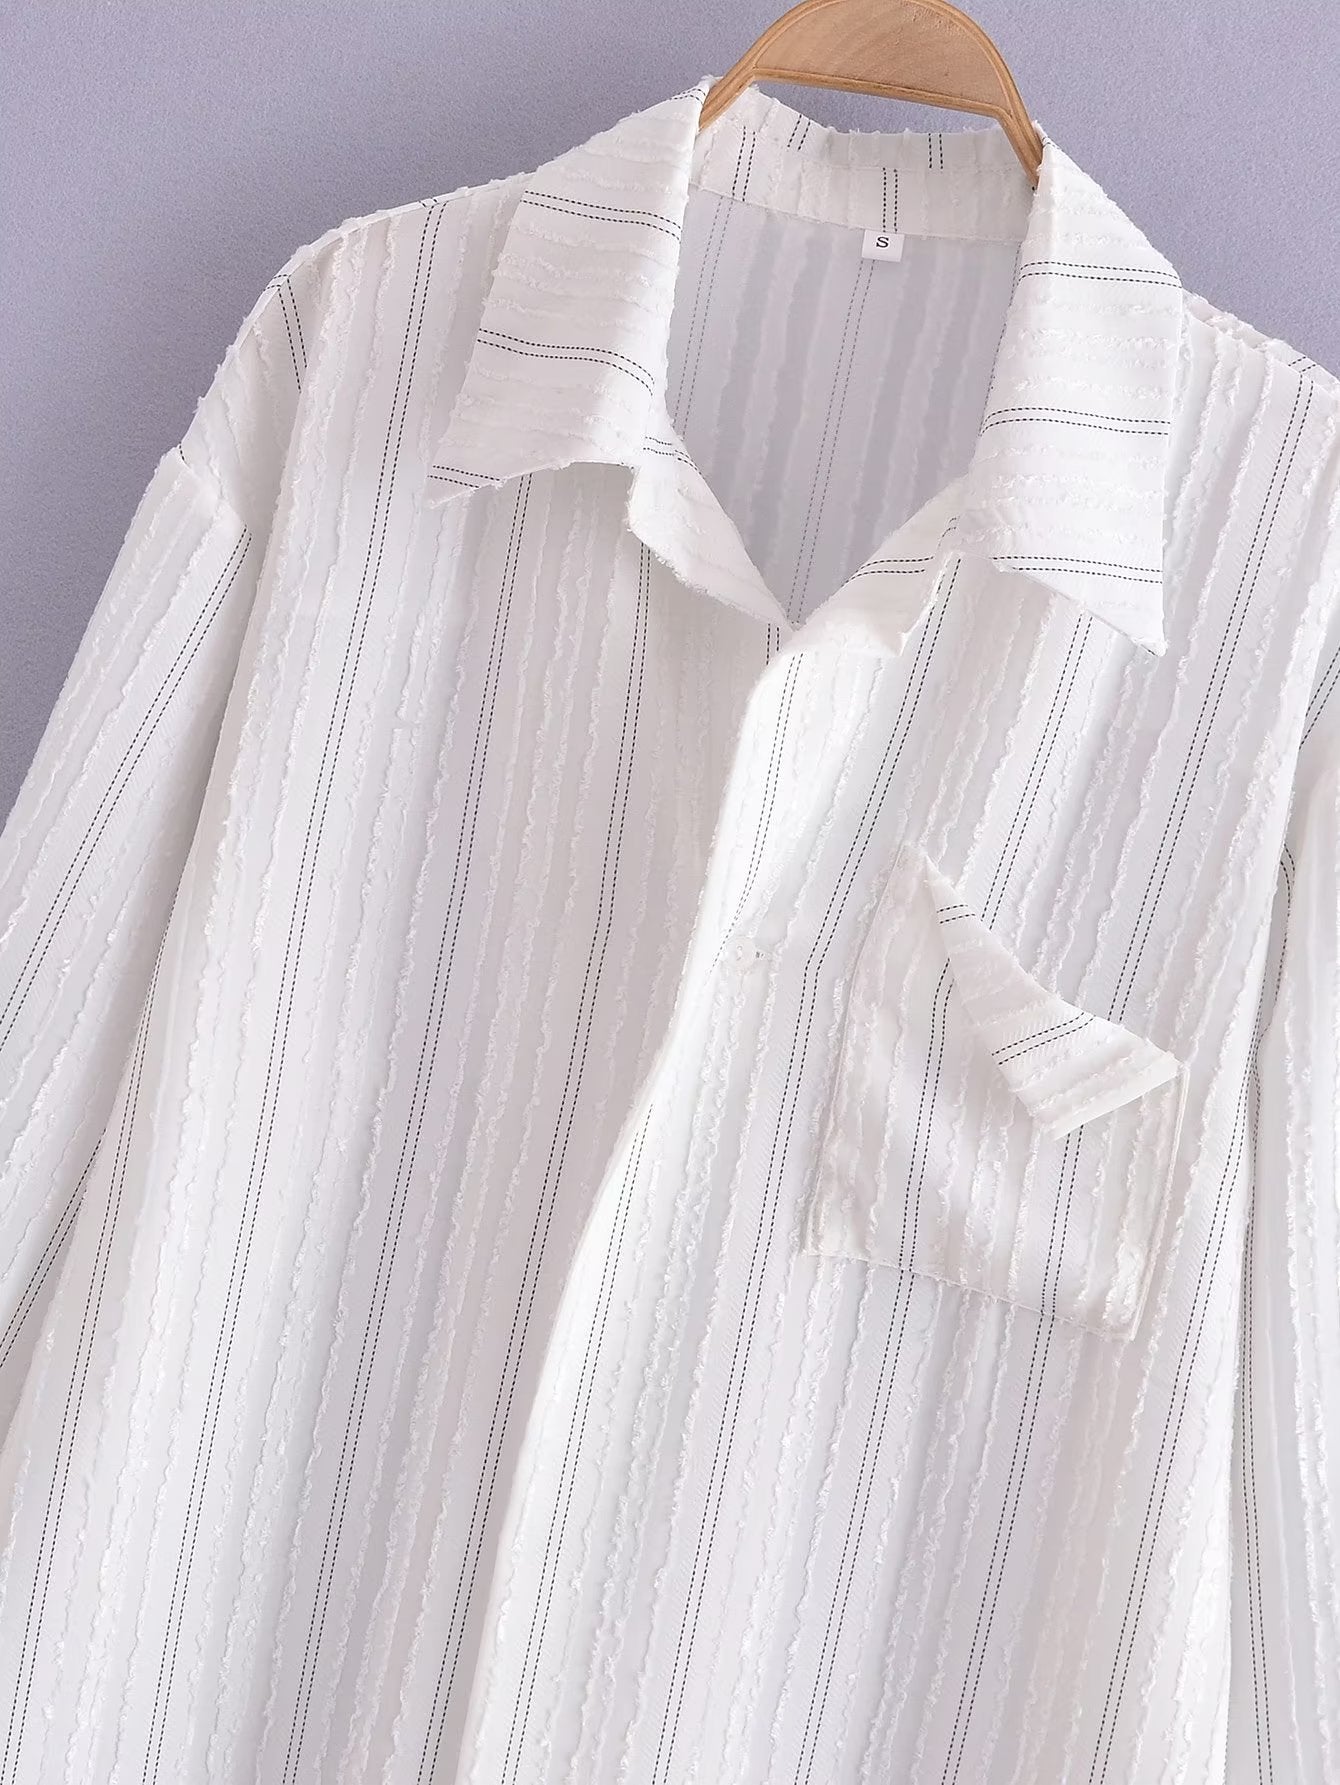 Loose Lazy Missing Mid Length White Striped Shirt Long Sleeve Top Women